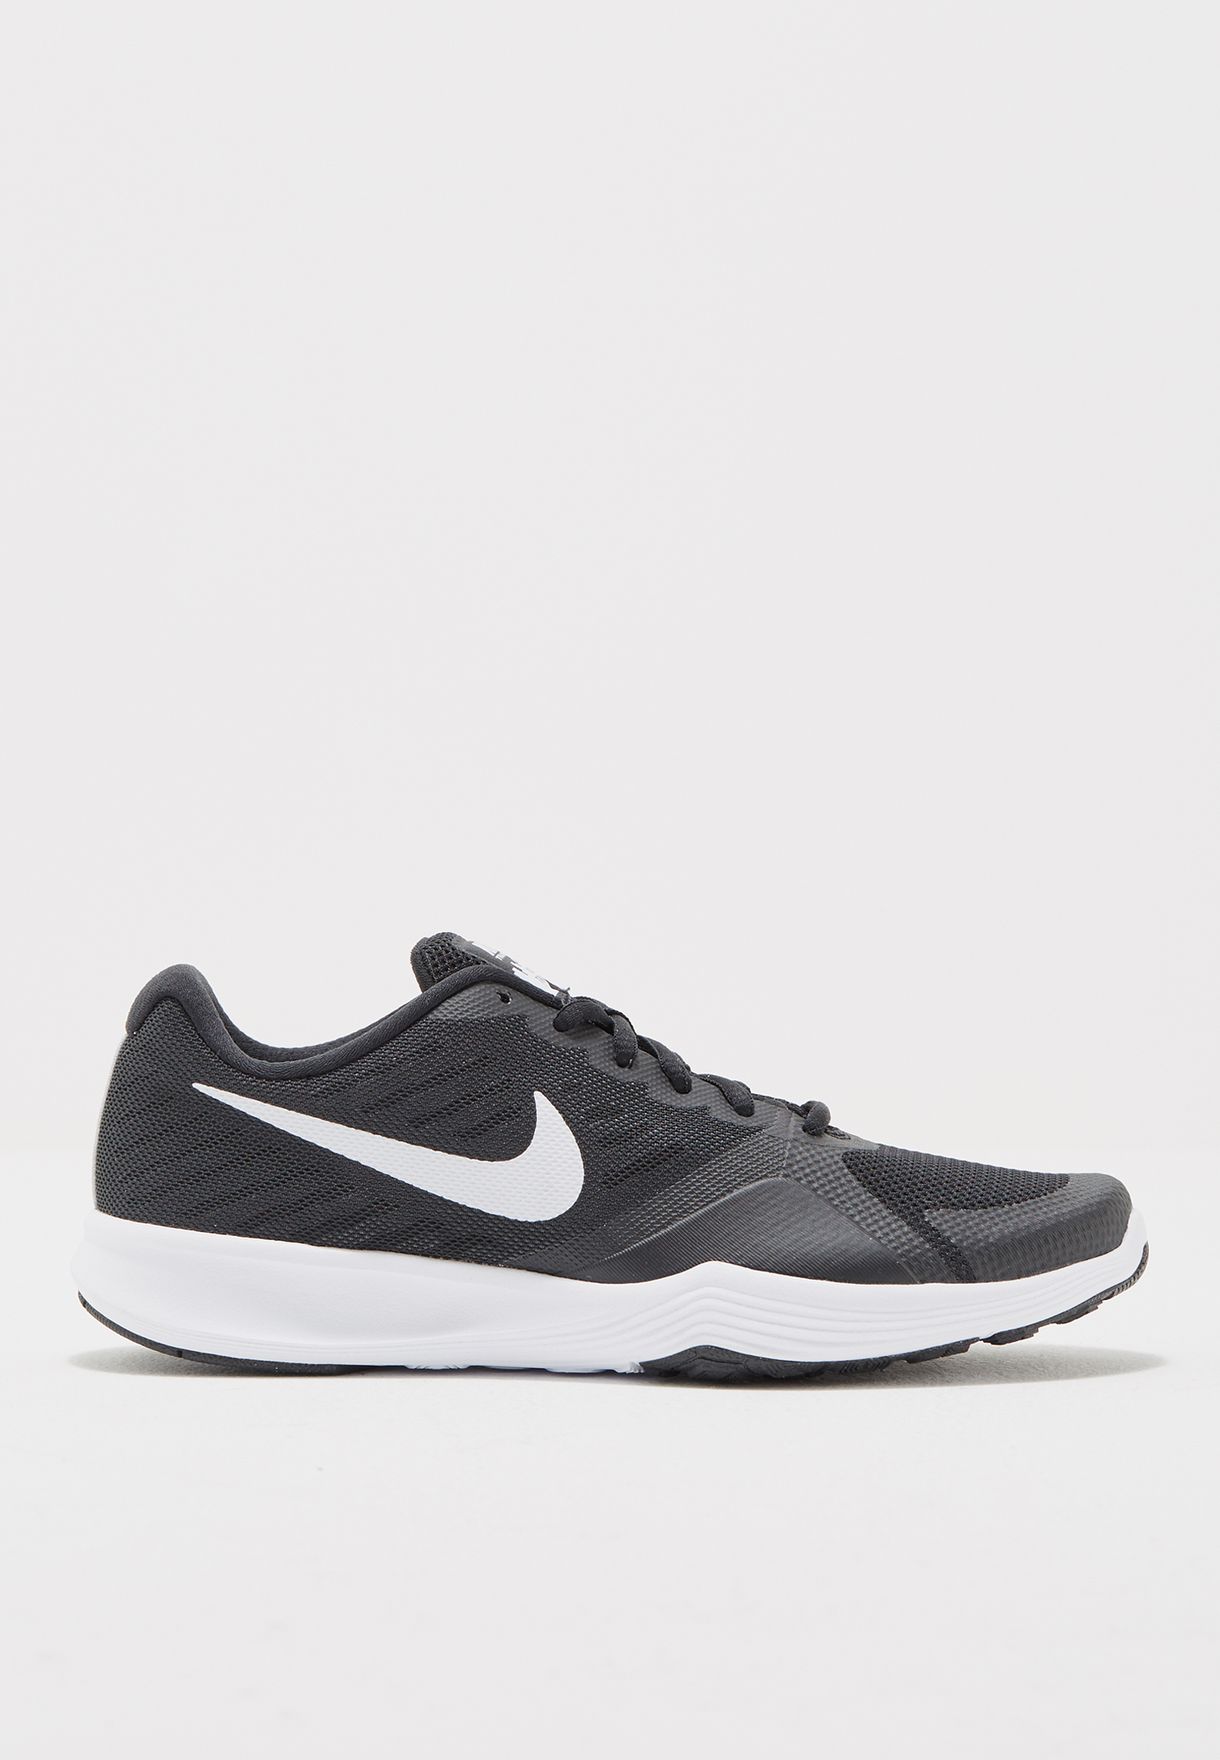 nike city trainer 1 cheap online